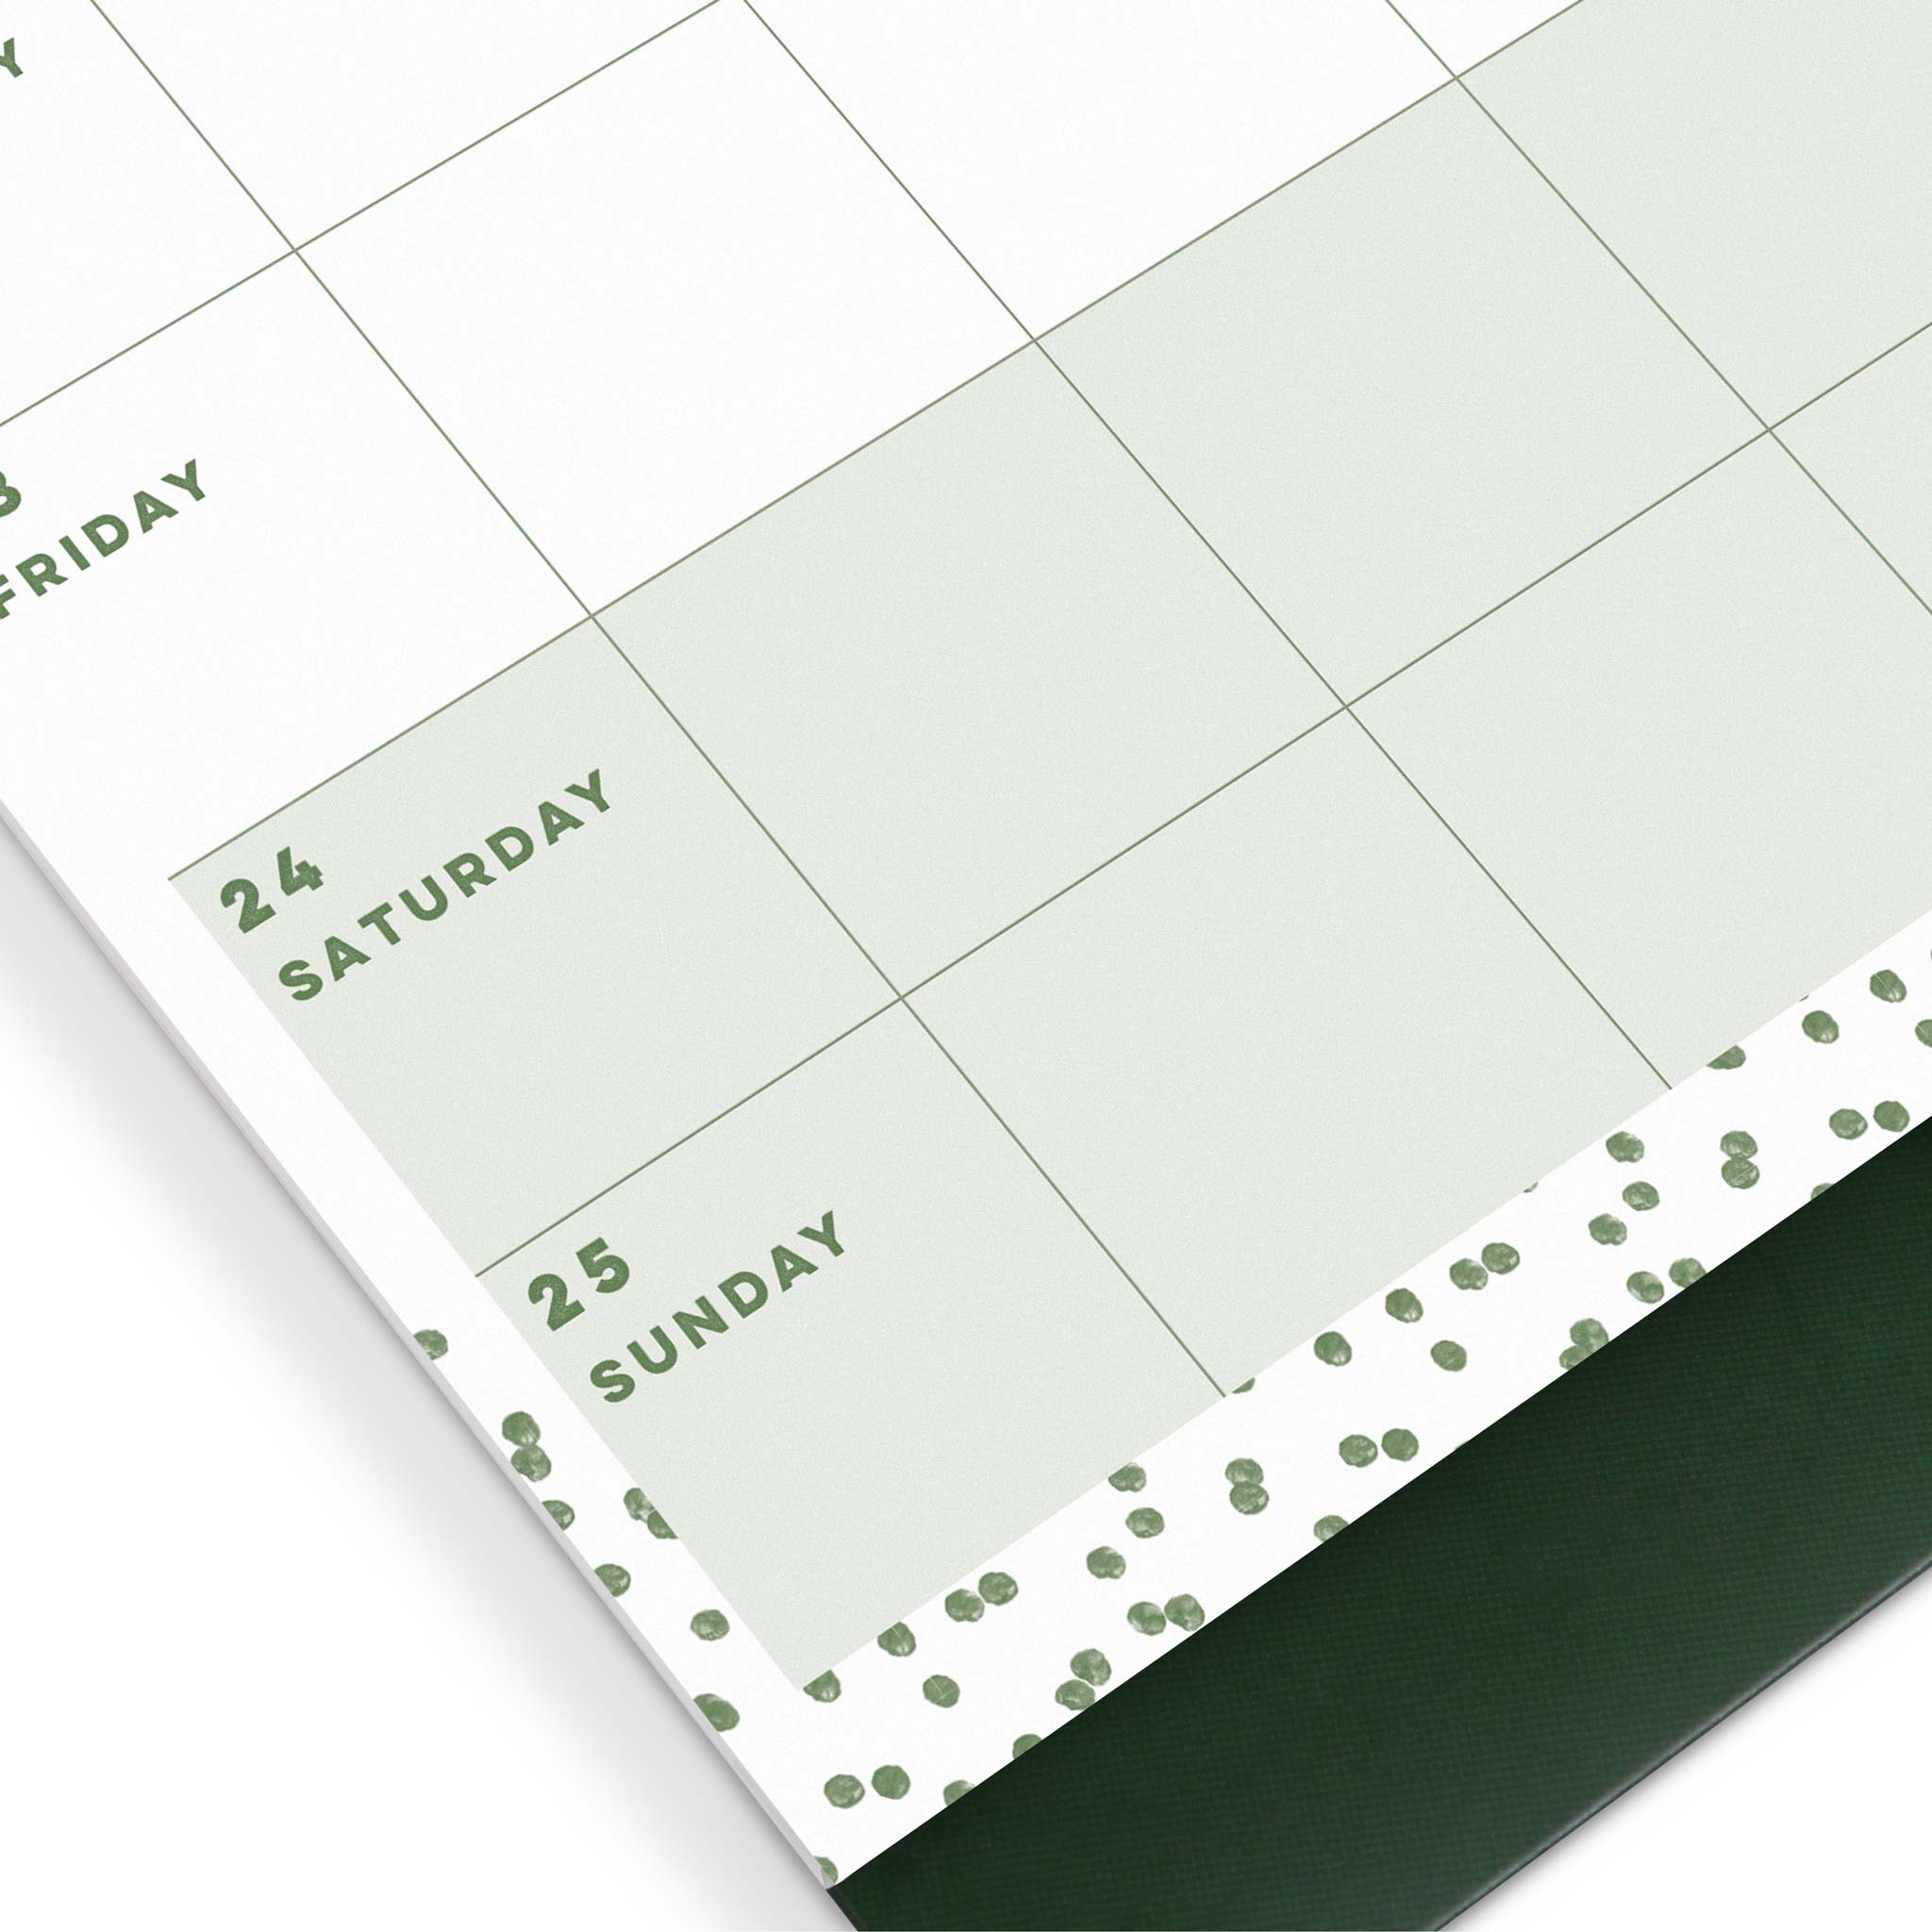 A close up of a calendar page showing shaded weekends